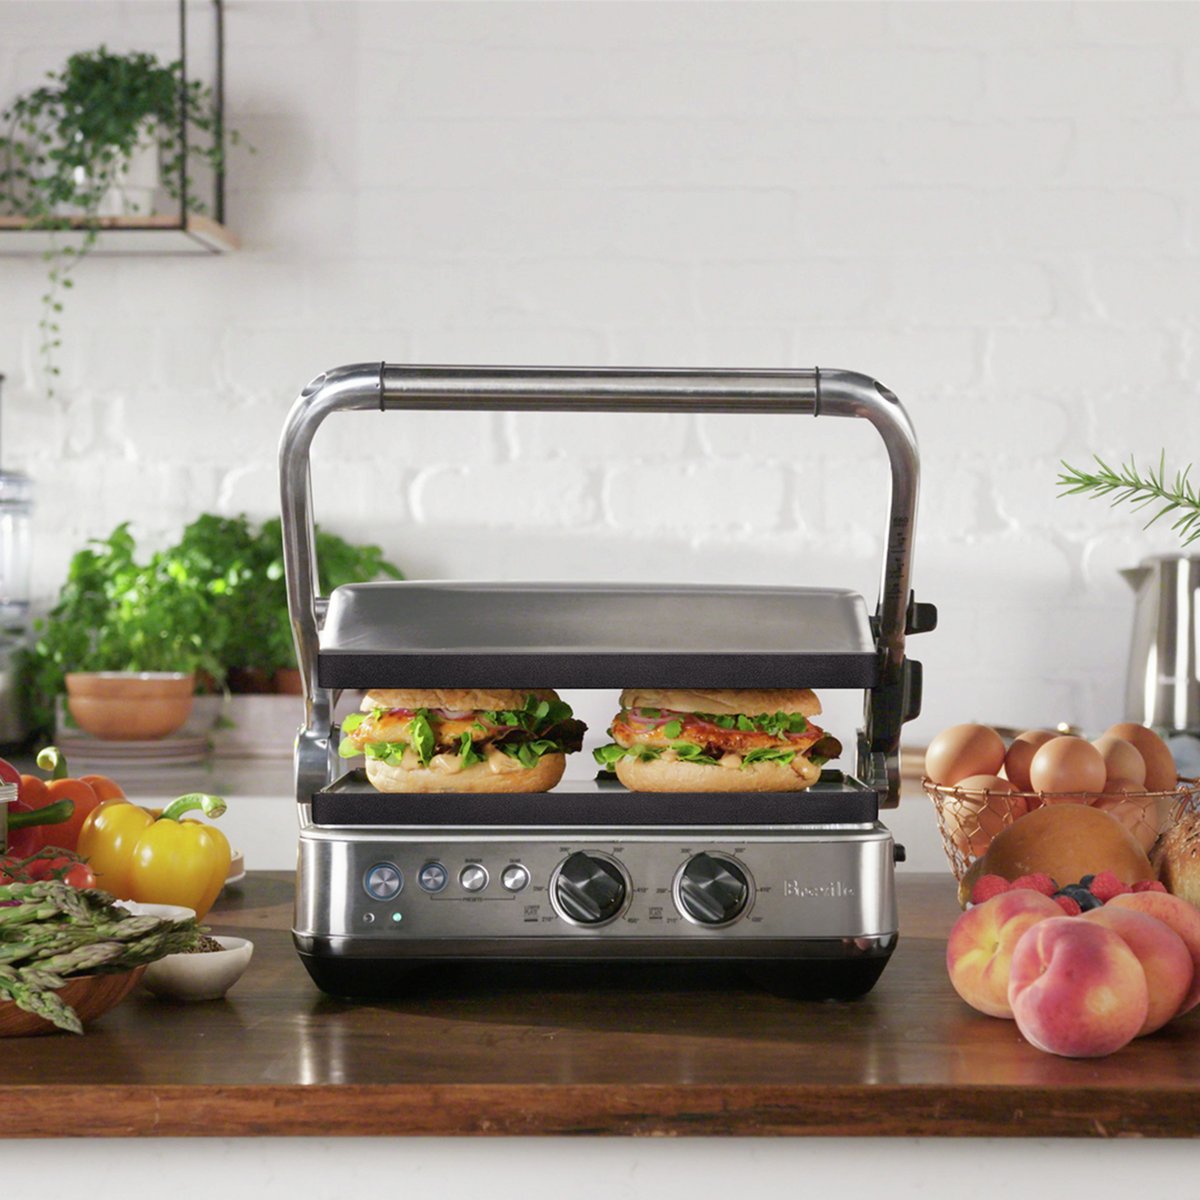 Introducing the Sear & Press™ Grill. From pressed sandwiches to seared steaks, do it all with reversible ribbed or flat plates. One-touch perfect Sandwich, Burger and Sear. bddy.me/2Smjznt